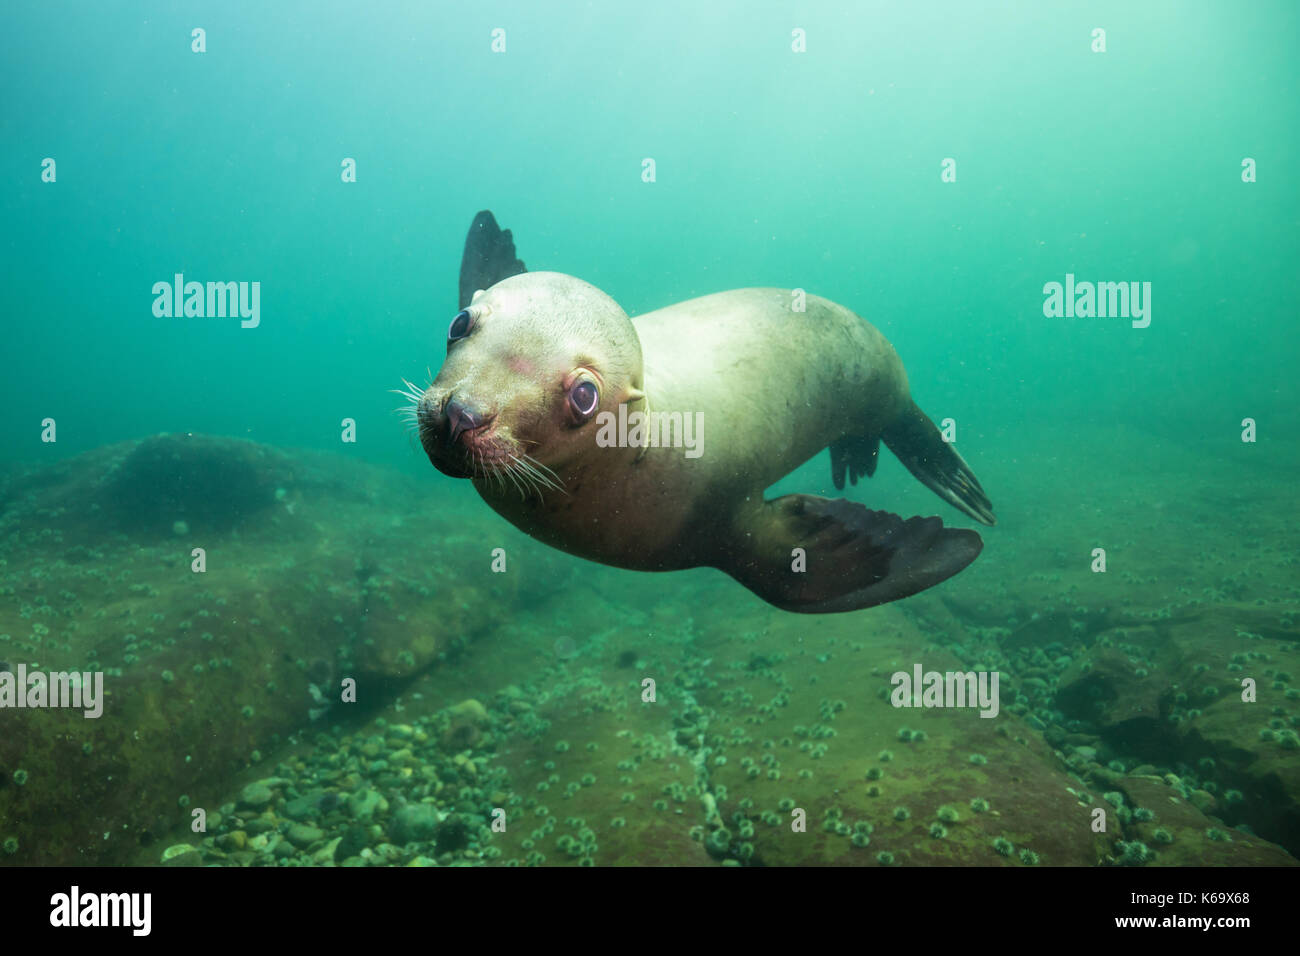 A close up picture of a cute Sea Lion swimming underwater. Picture taken in Pacific Ocean near Hornby Island, British Columbia, Canada. Stock Photo